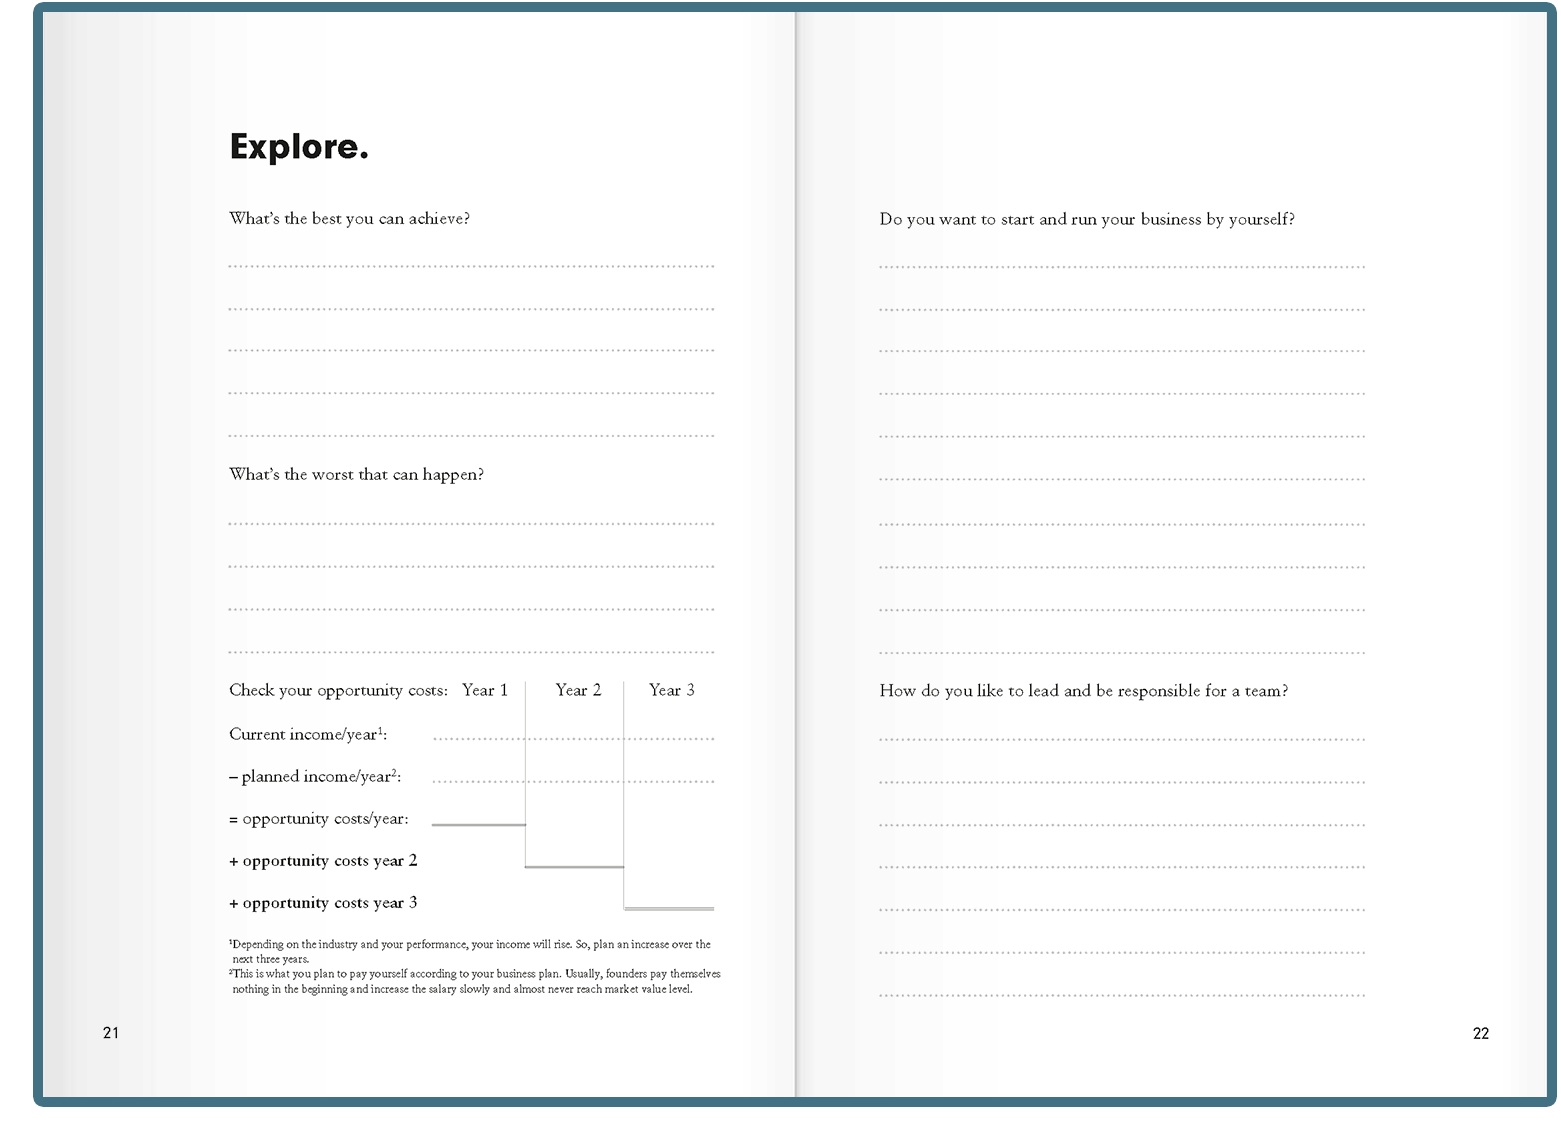 Start-up Journal Chapter 2: Even more space for text for writing for self-reflection